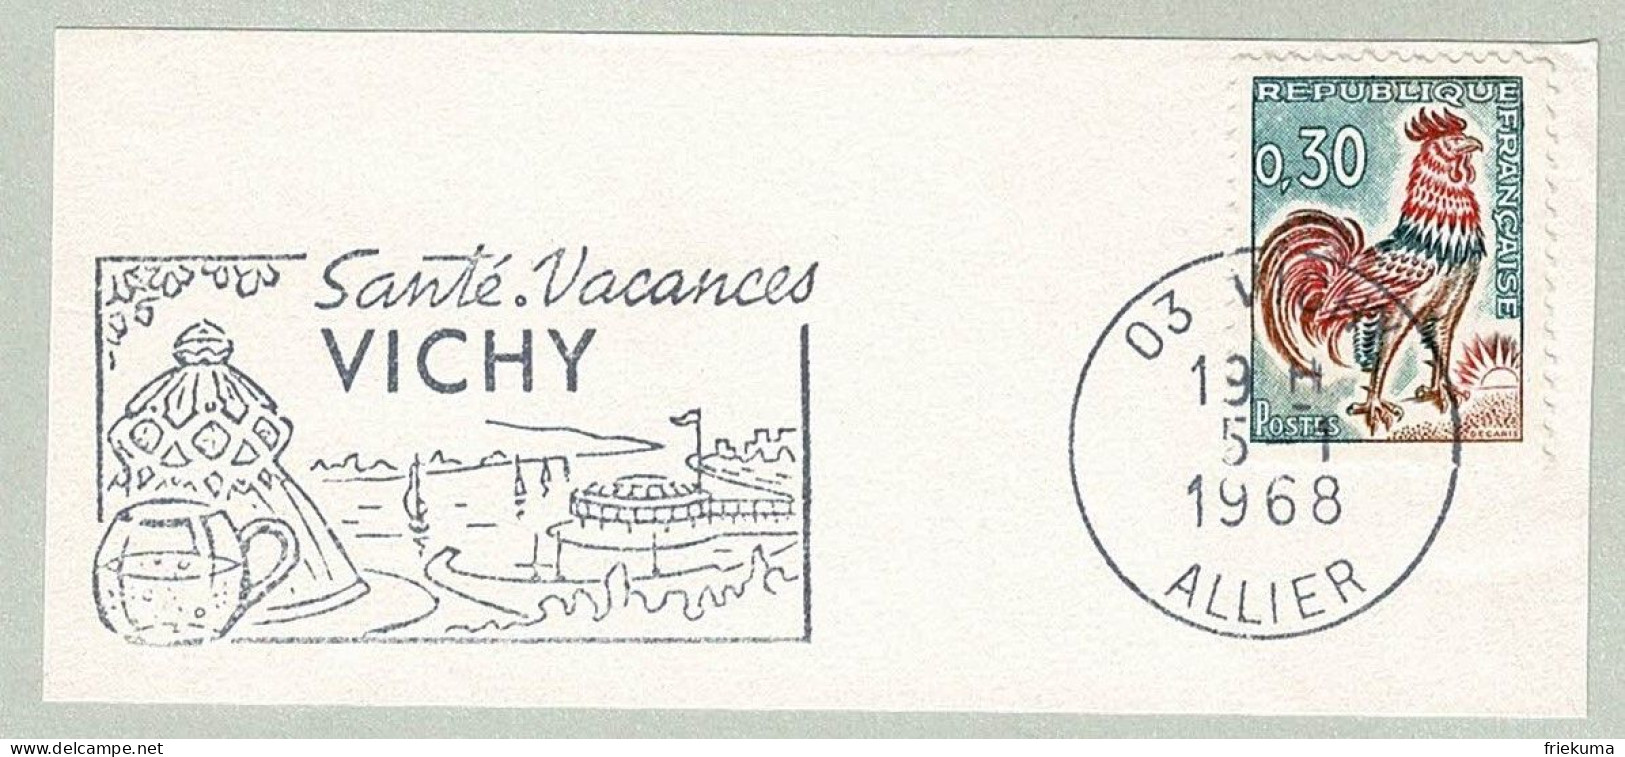 Frankreich / France 1968, Flaggenstempel Vichy, Thermalbad / Centre Thermal - Termalismo